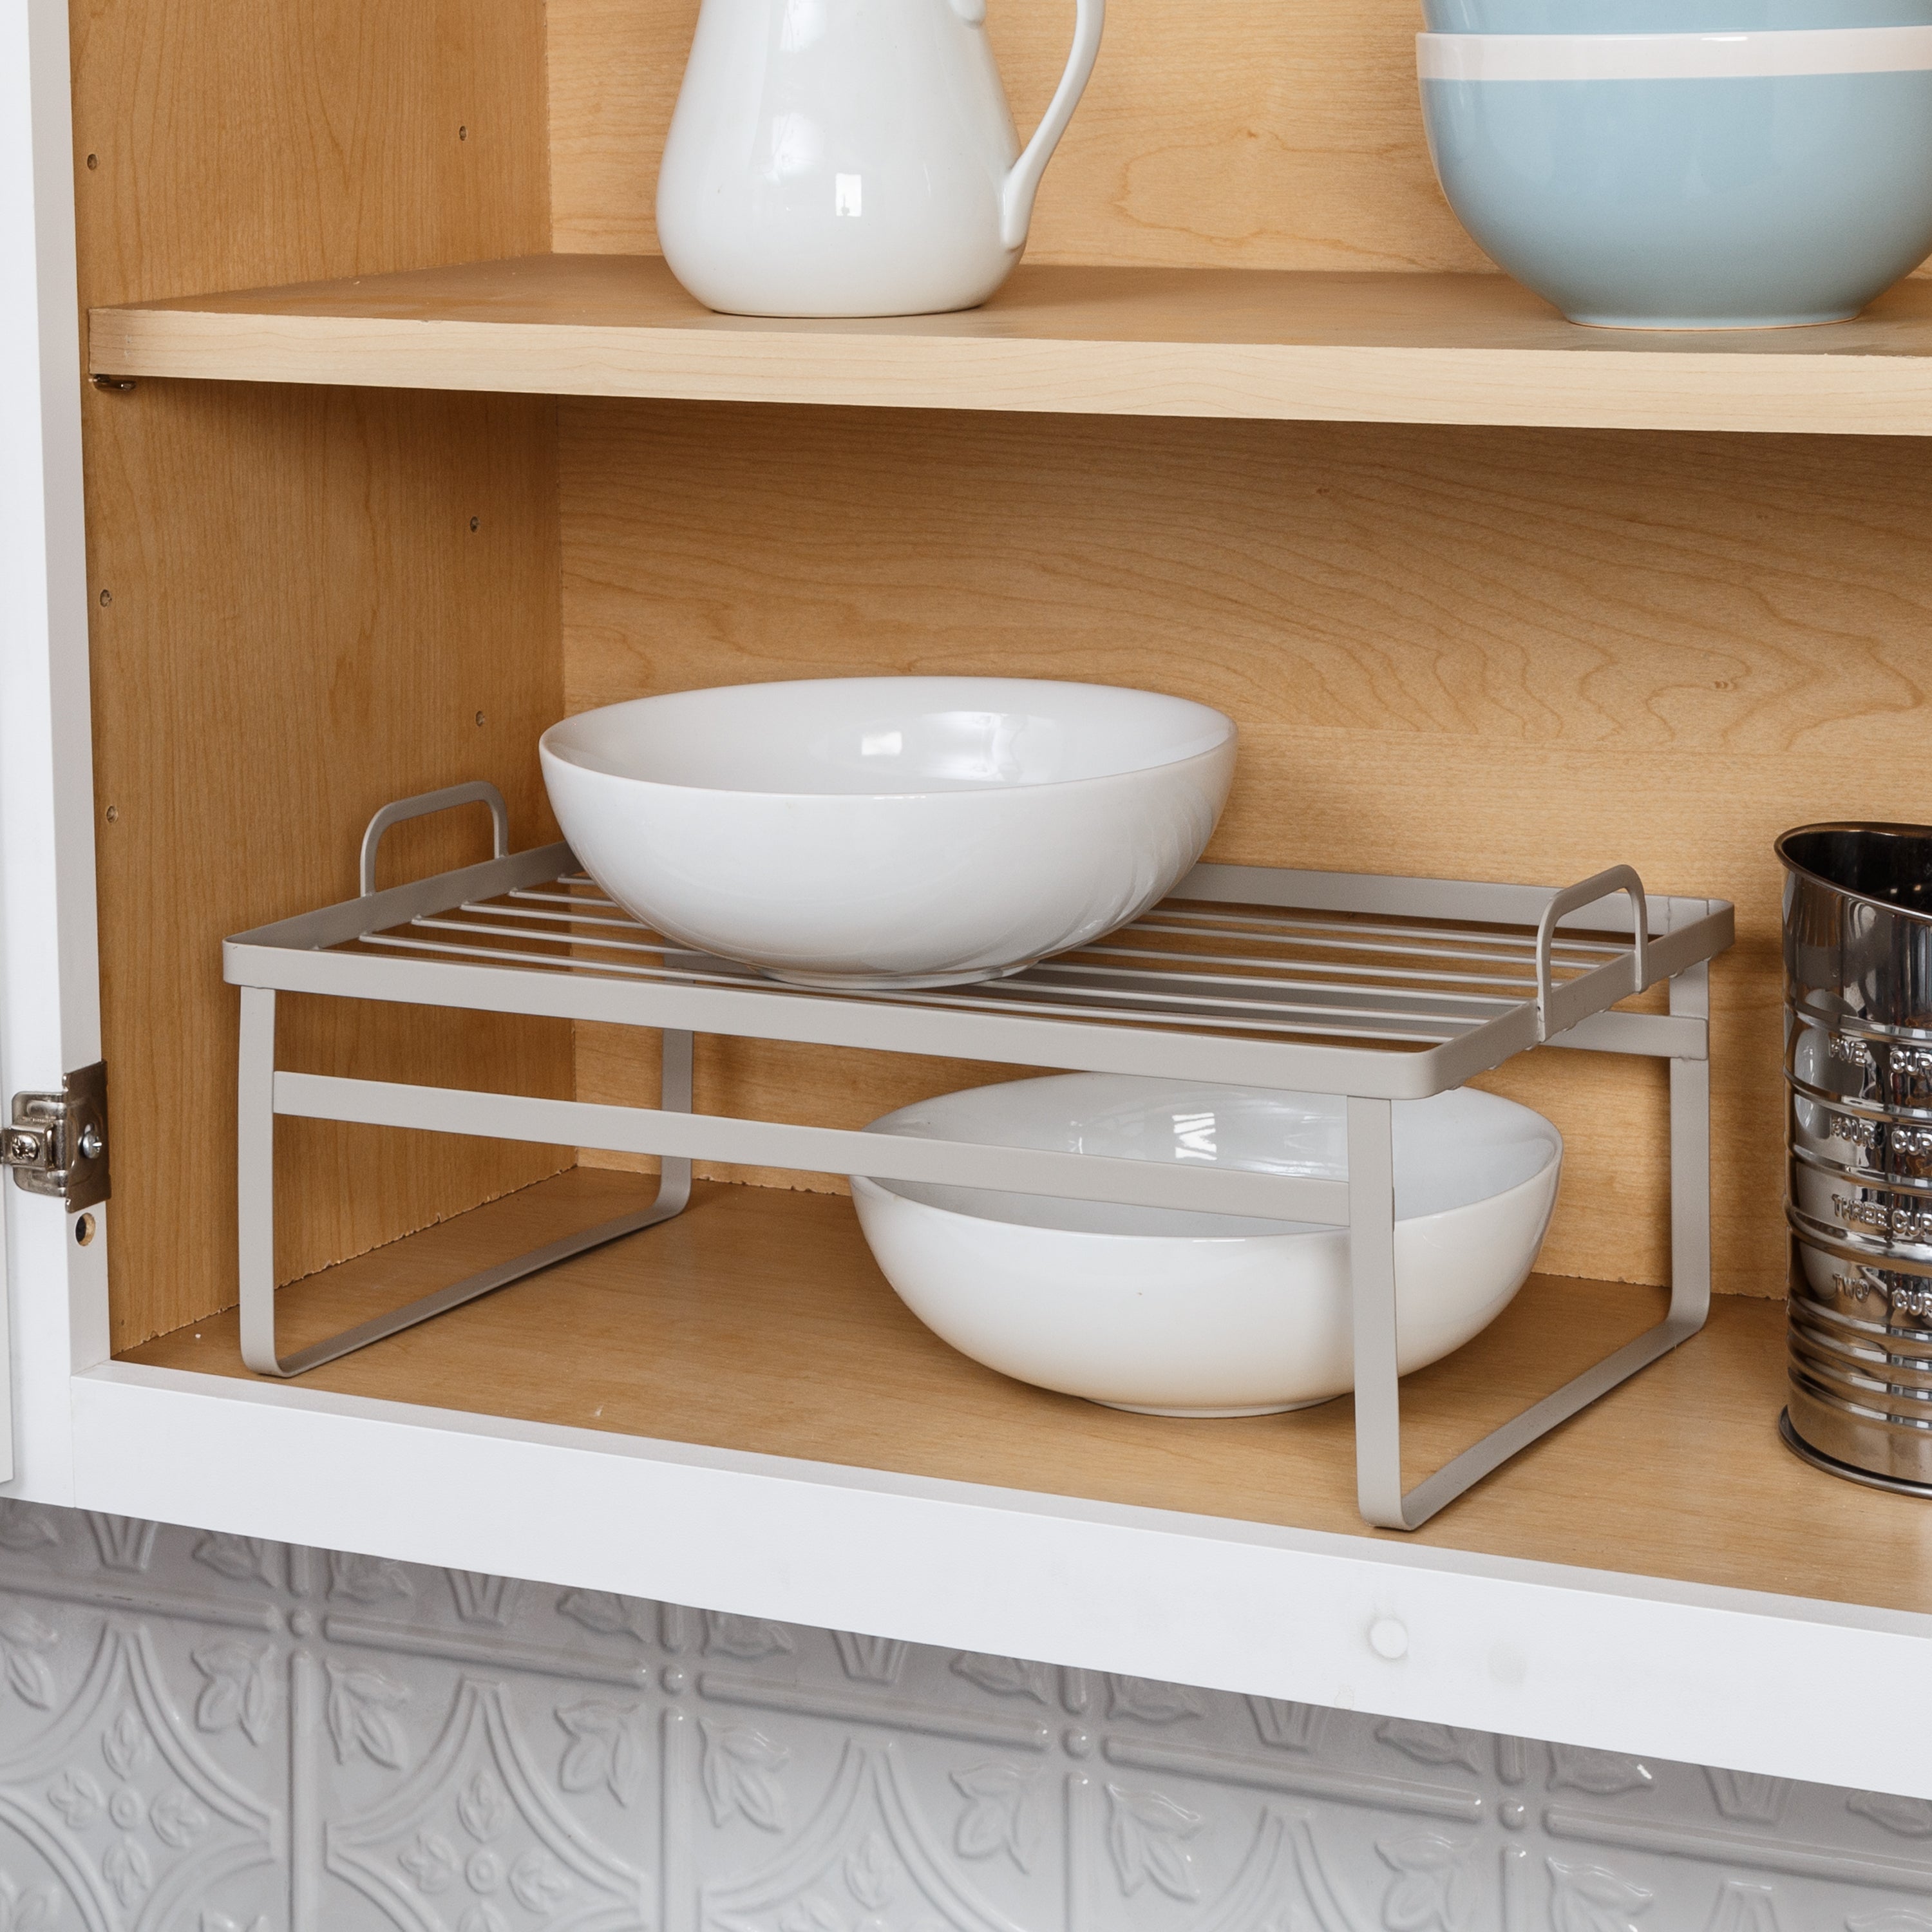 Honey-Can-Do - Stacking Cabinet Organizer - Chrome